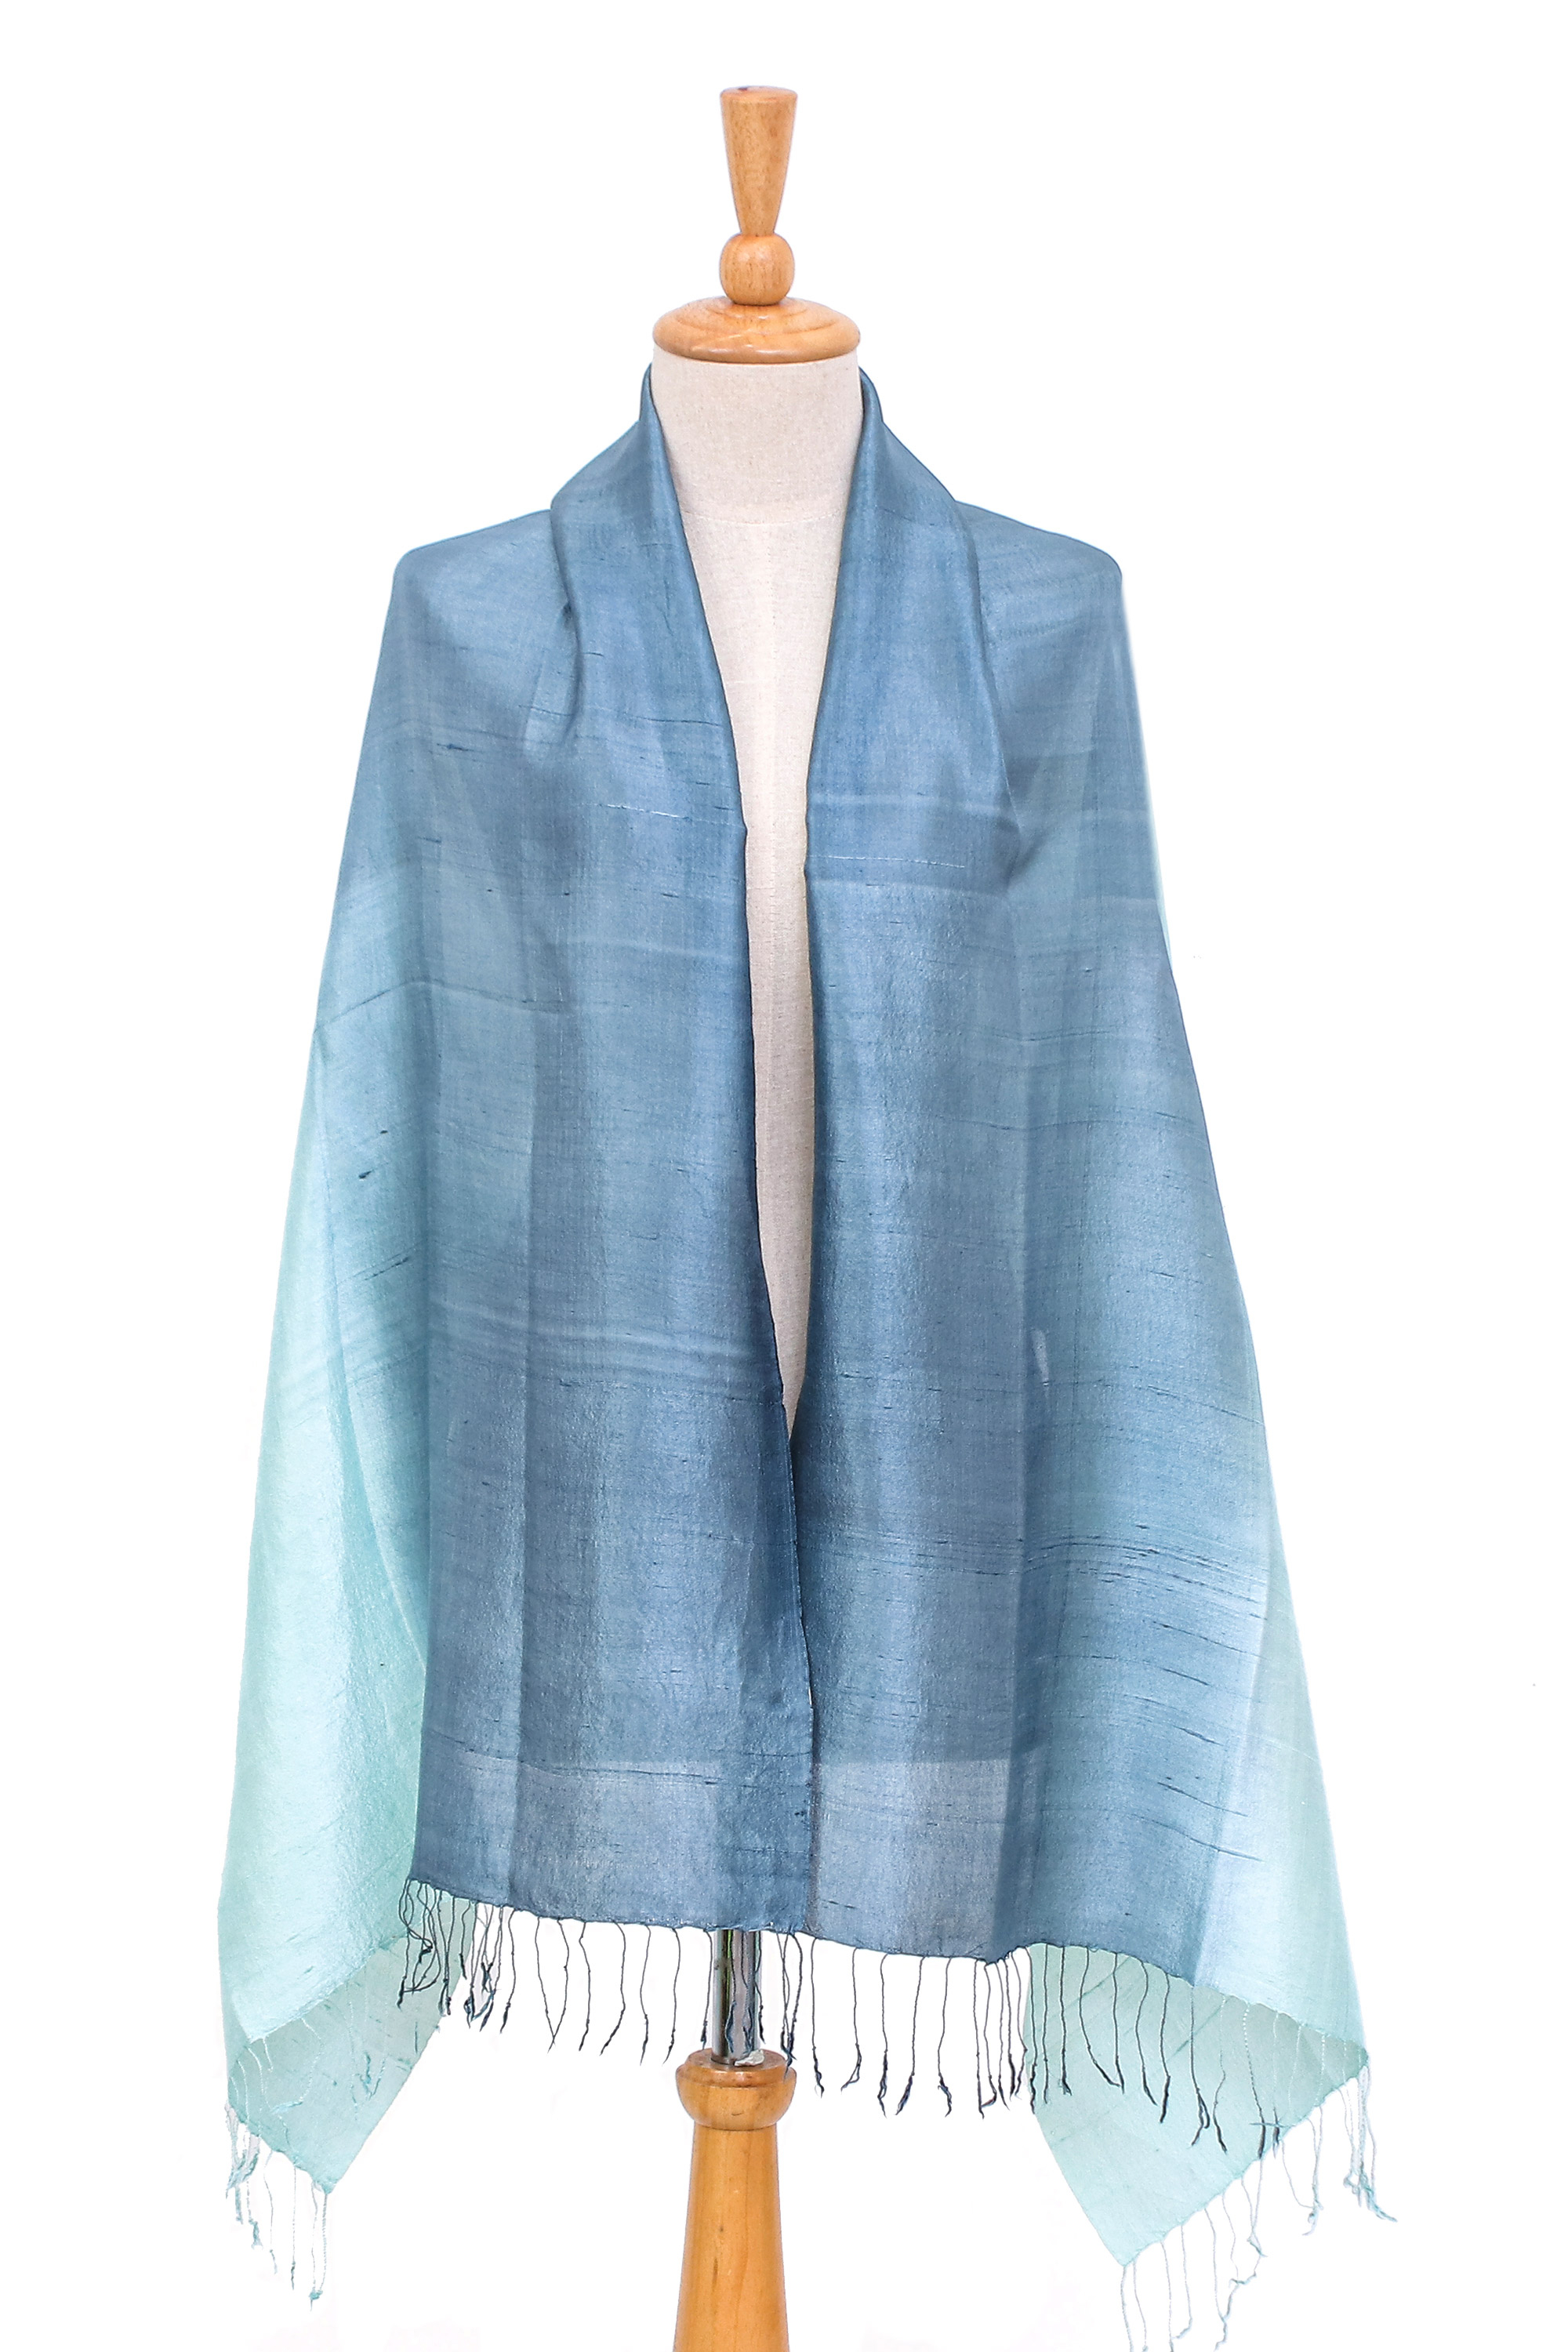 UNICEF Market  Blue and Green Fringed Silk Shawl Hand-Woven in Thailand -  Hydrangea Spring